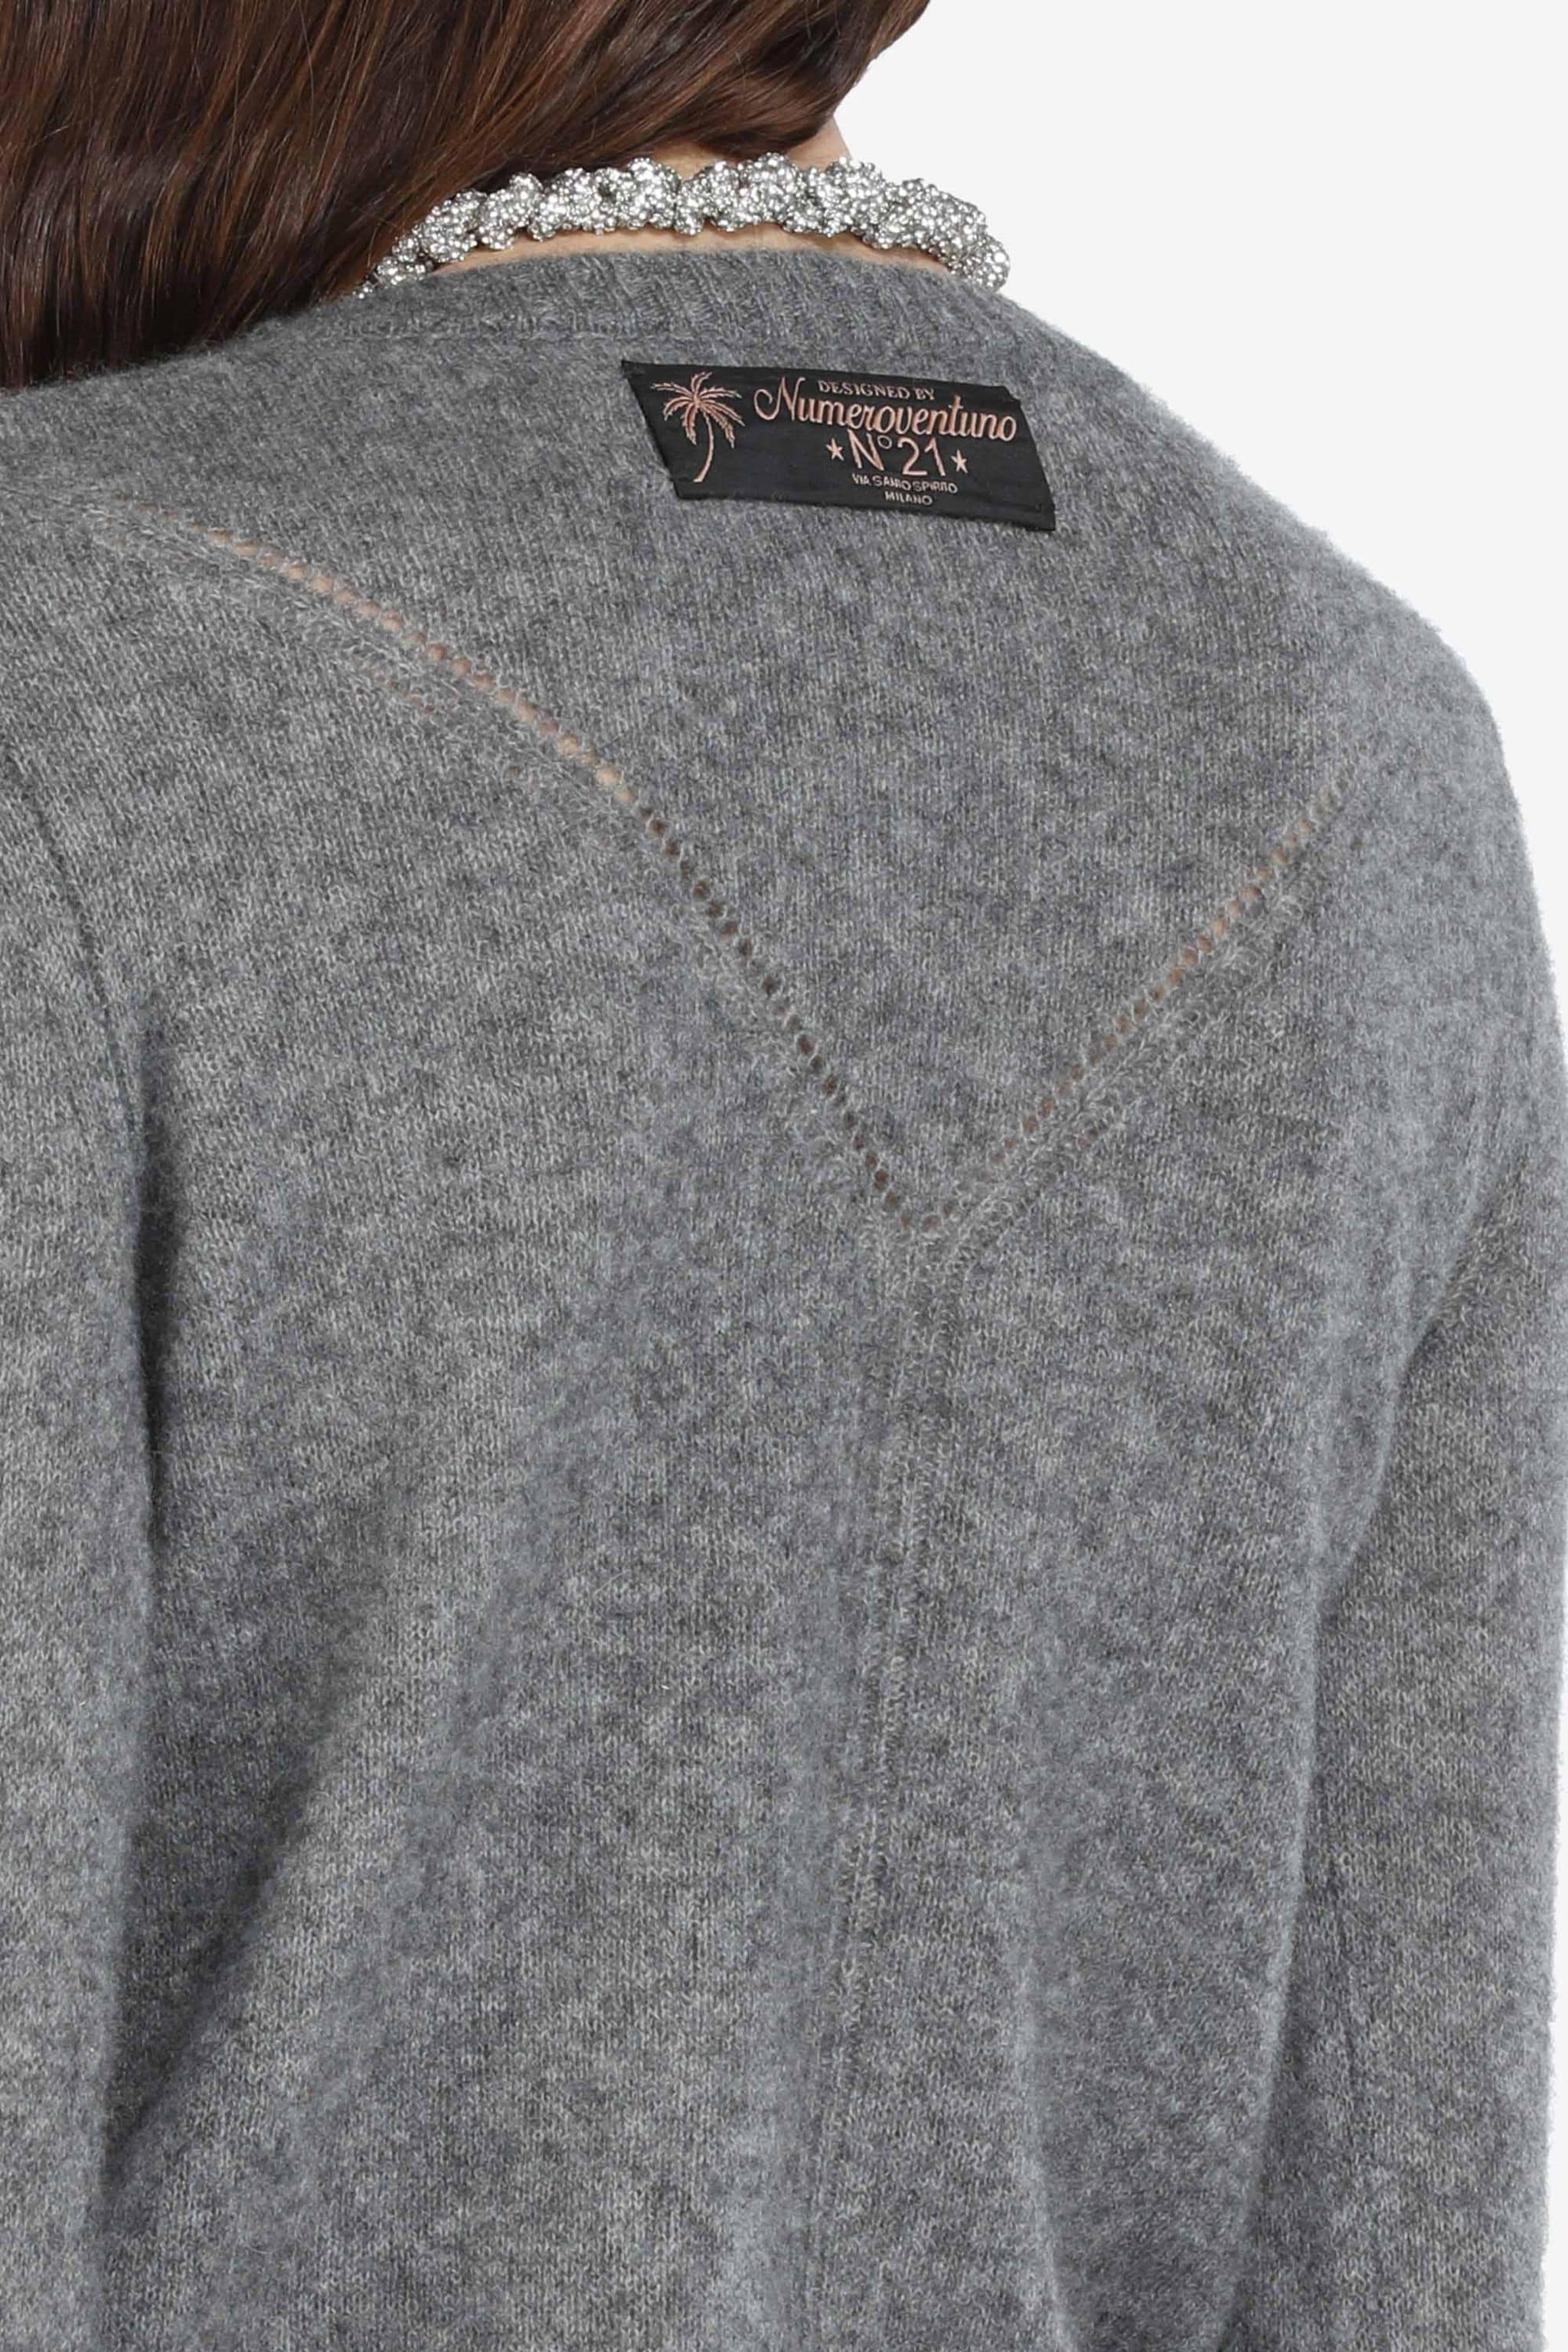 LOGO PATCH CASHMERE SWEATER - 5